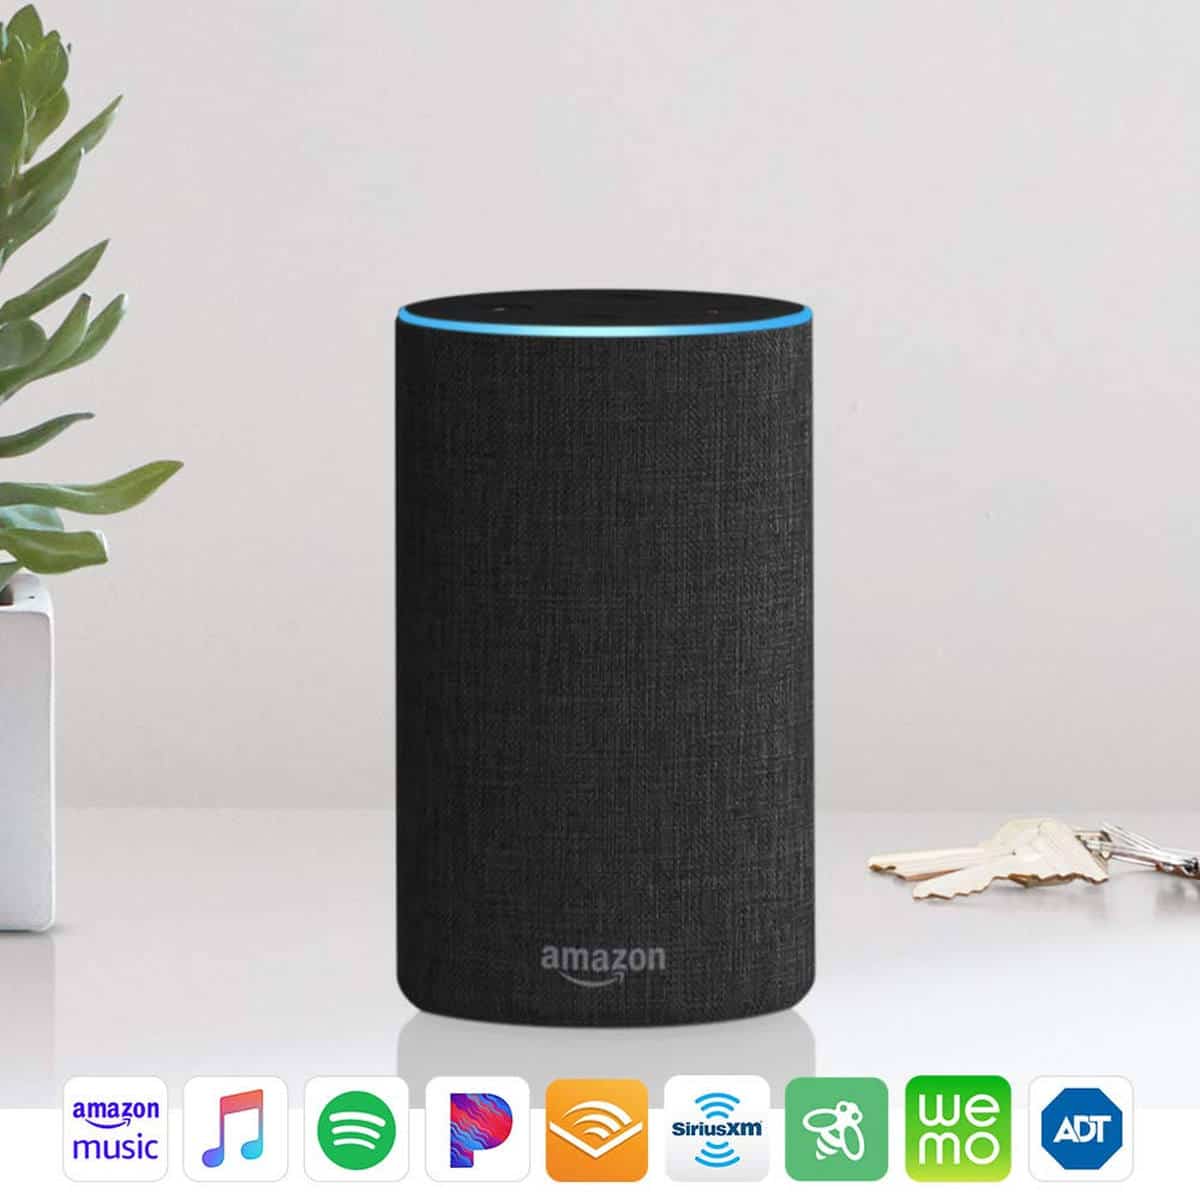 2nd Gen Echo Smart Speaker with Alexa | Top Selling Products On Amazon You Need To Check Out ASAP